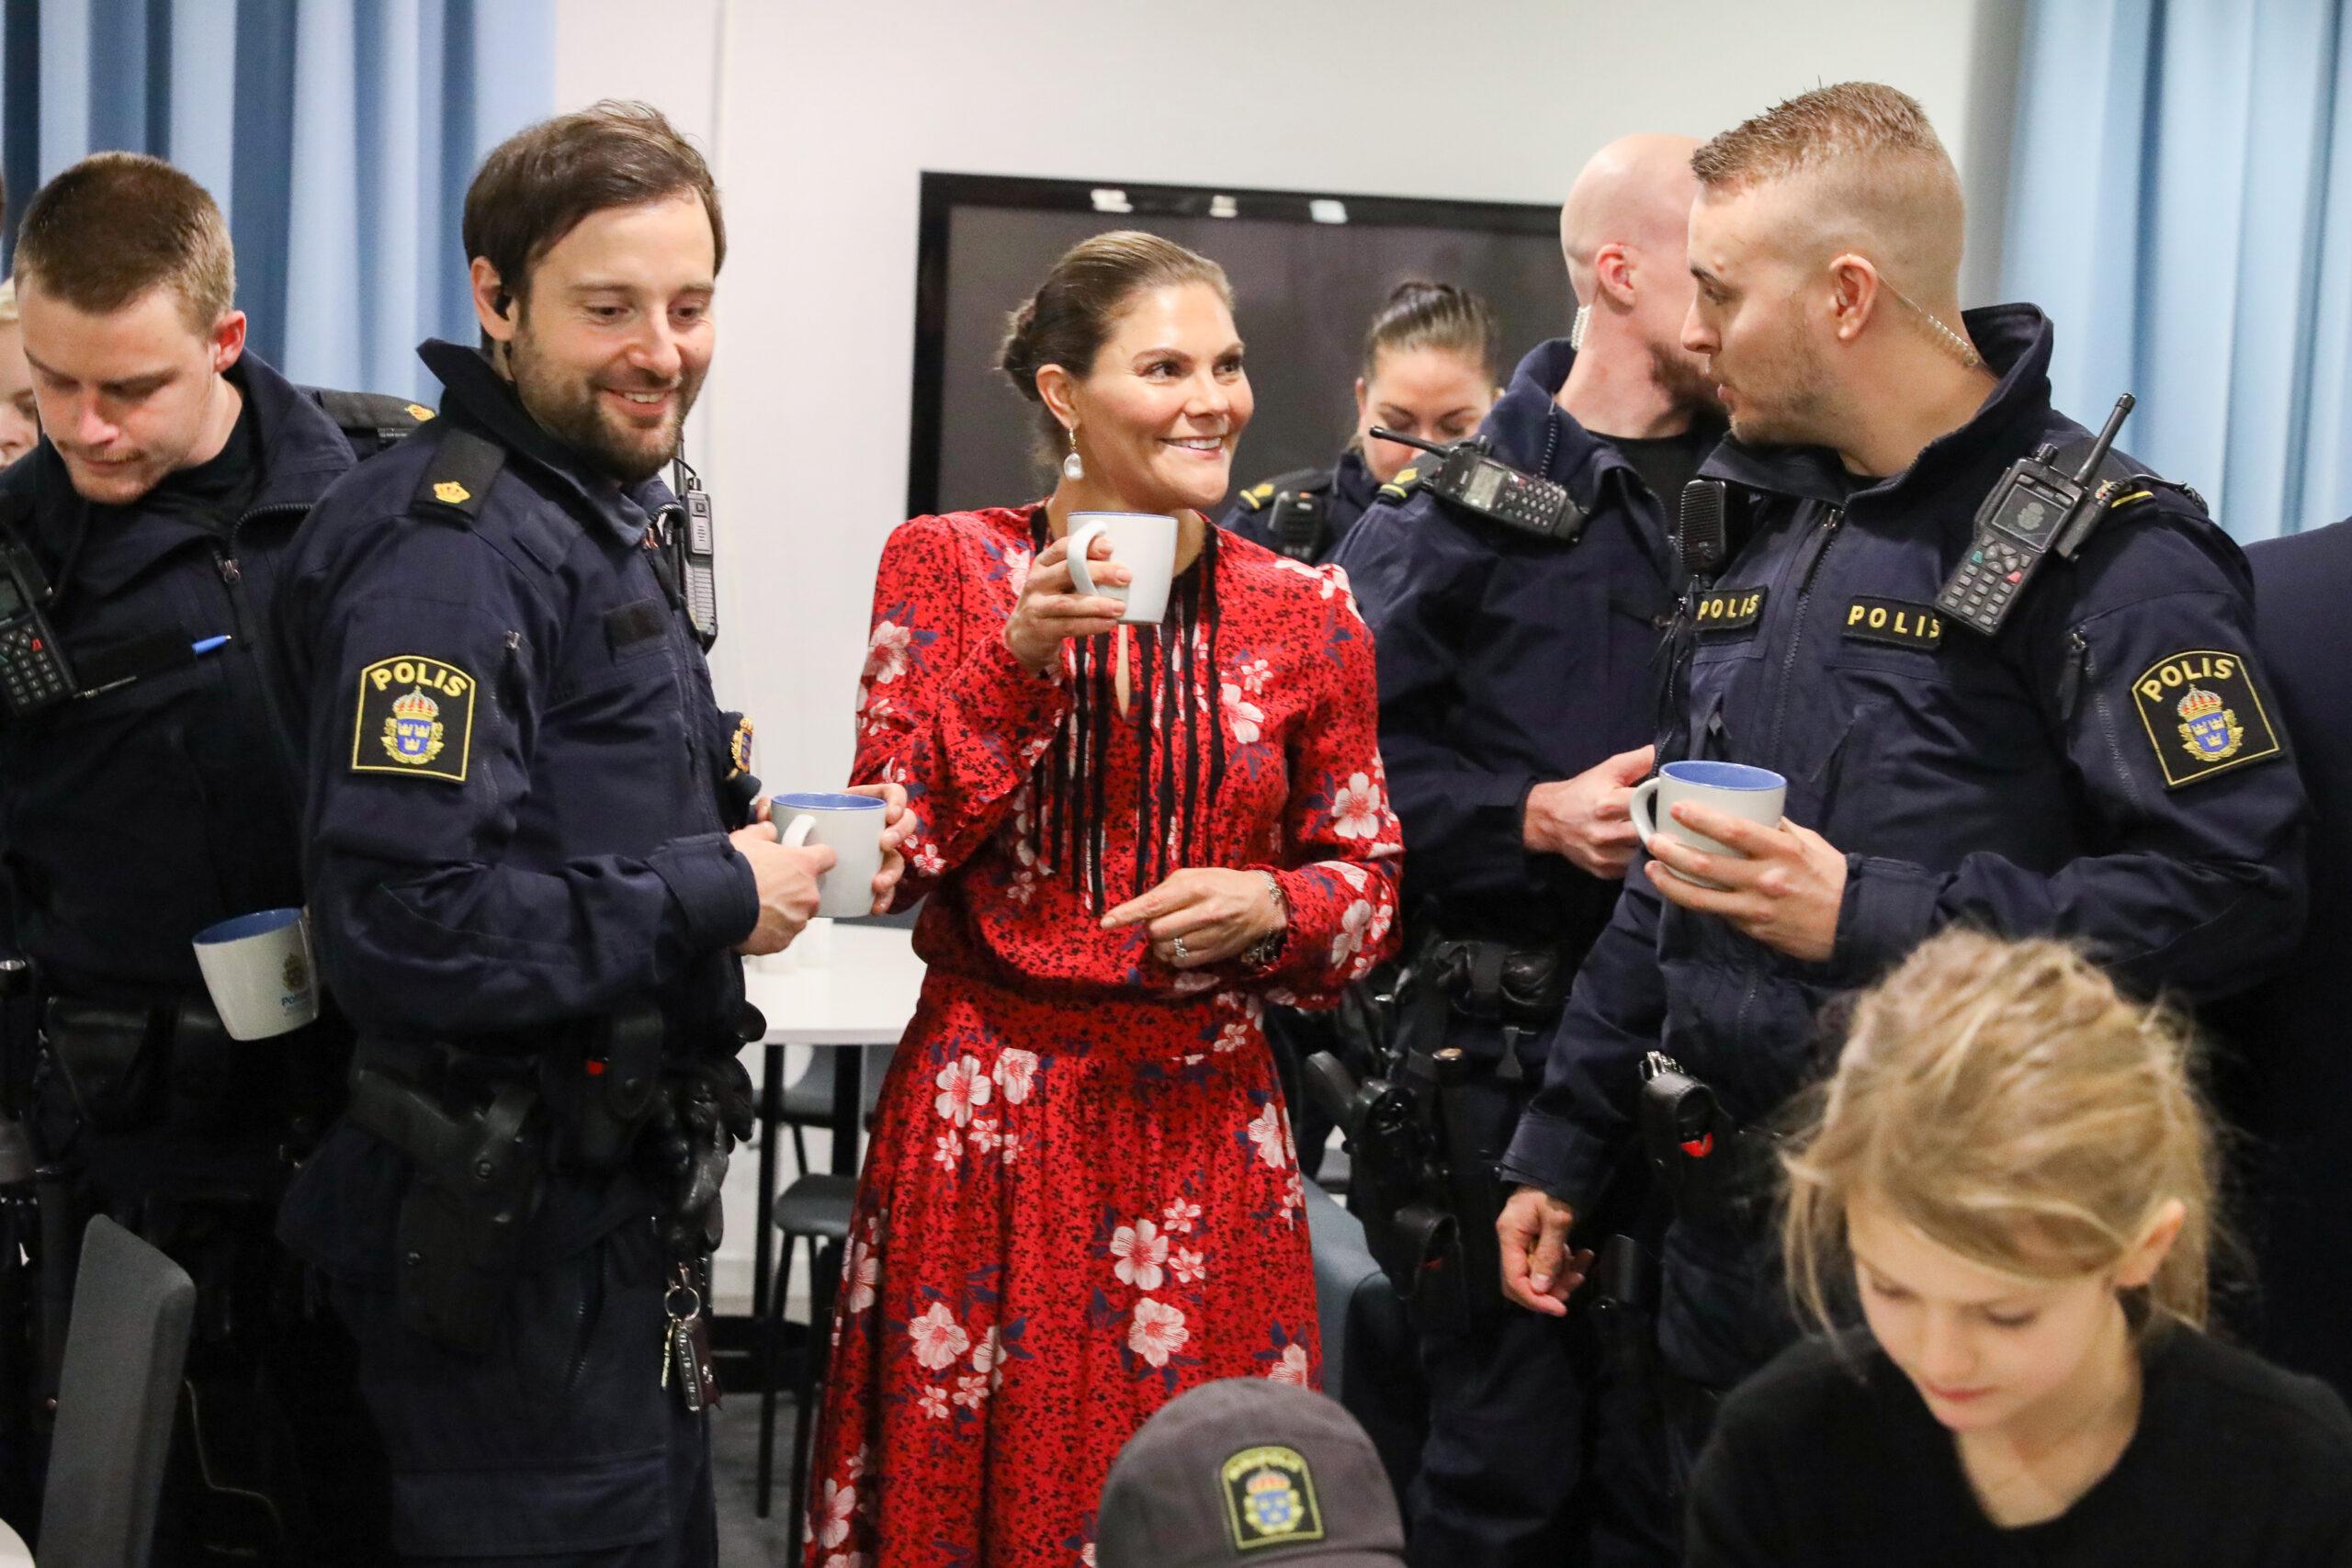 Crown Princess Victoria drinking coffee with police officers in uniform.